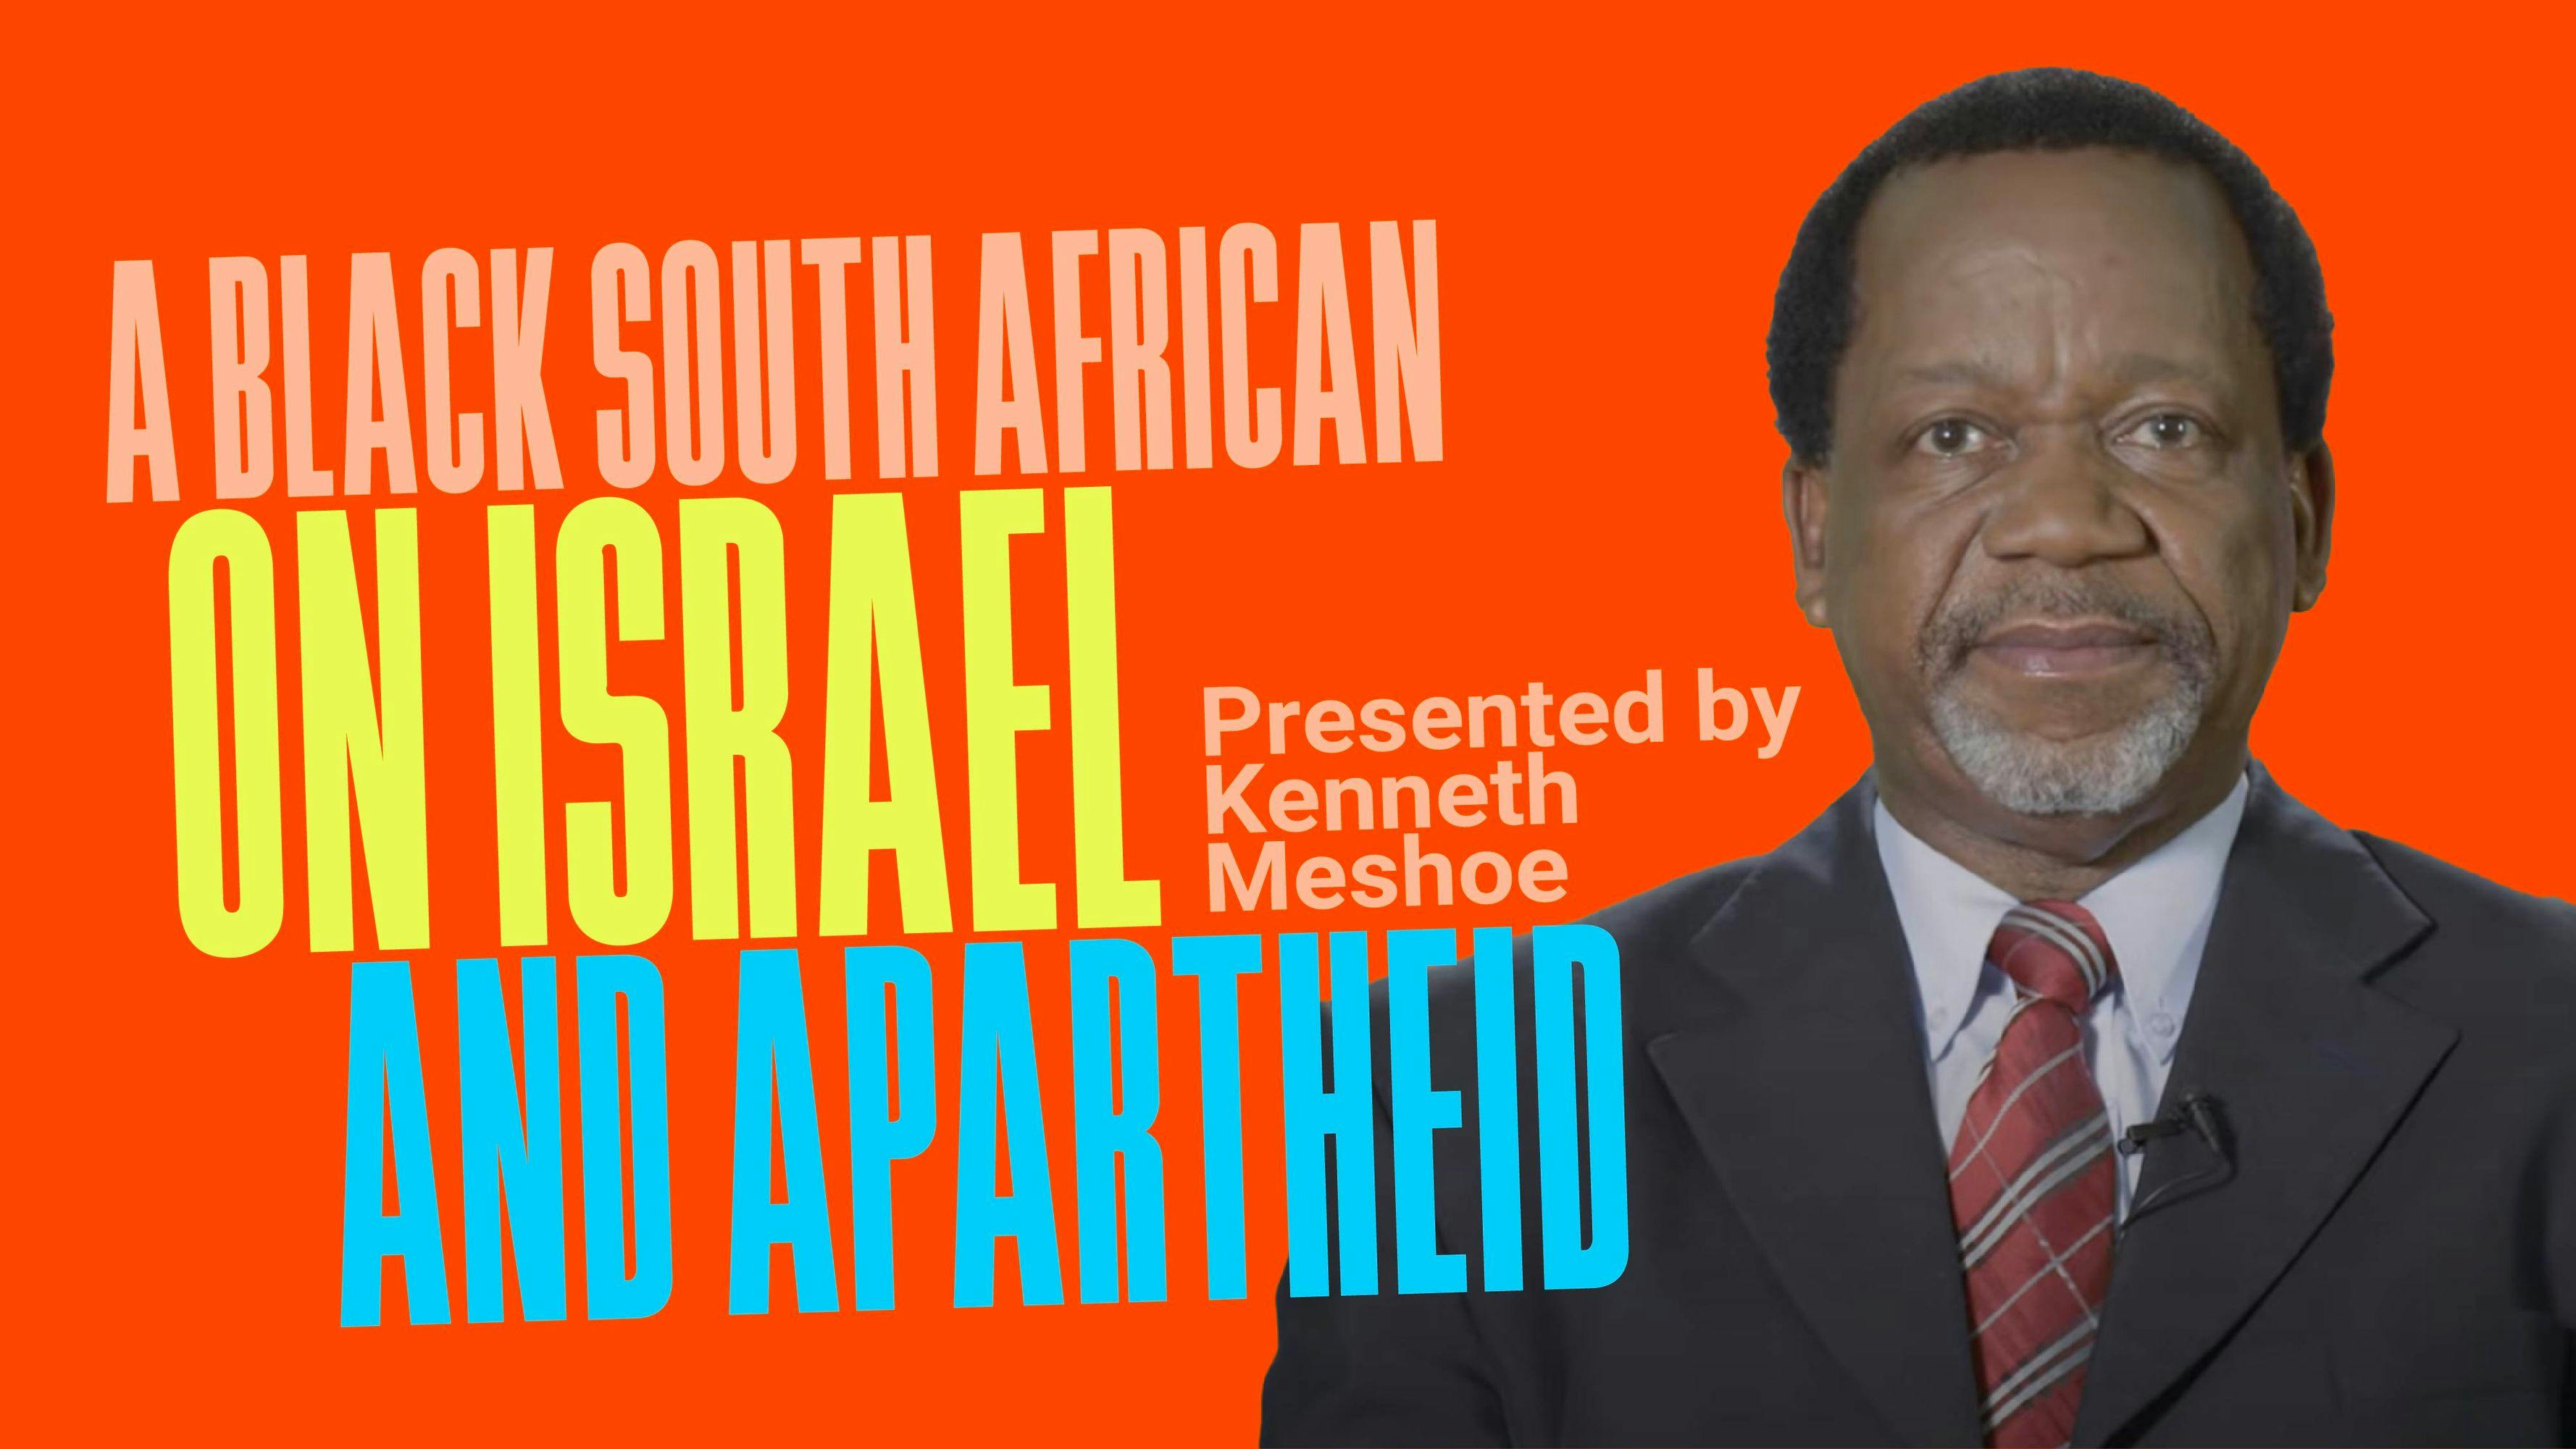 A Black South African on Israel and Apartheid